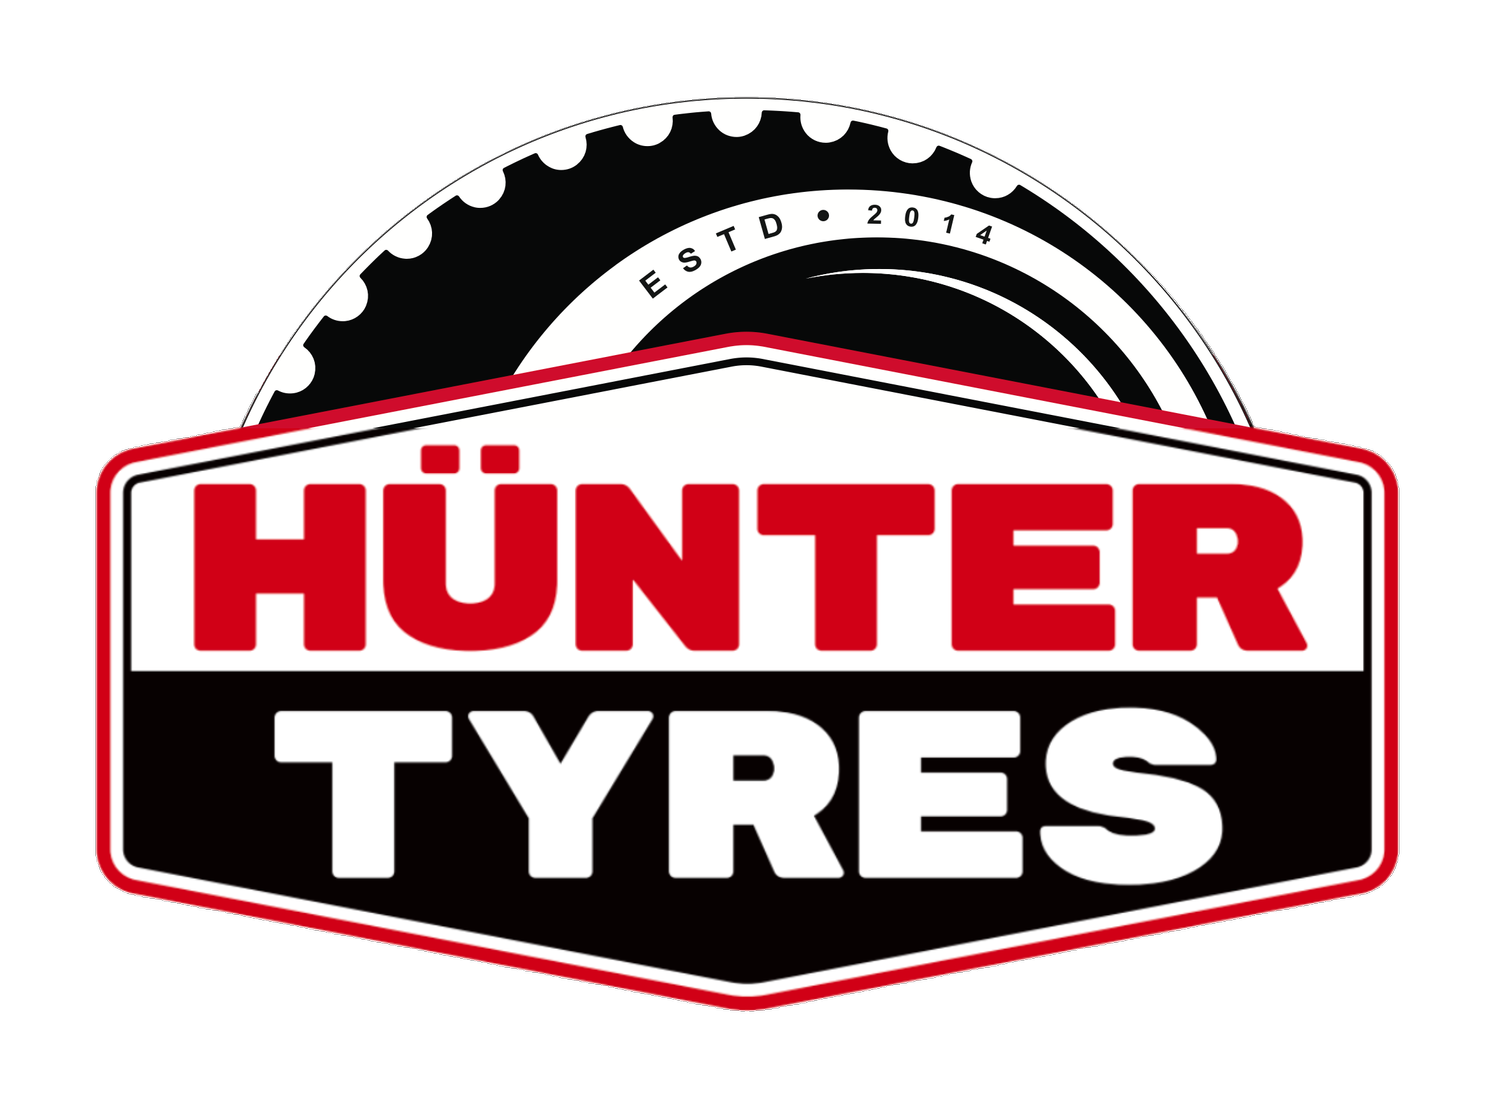 Hünter Tyres &mdash; Safety first, every drive